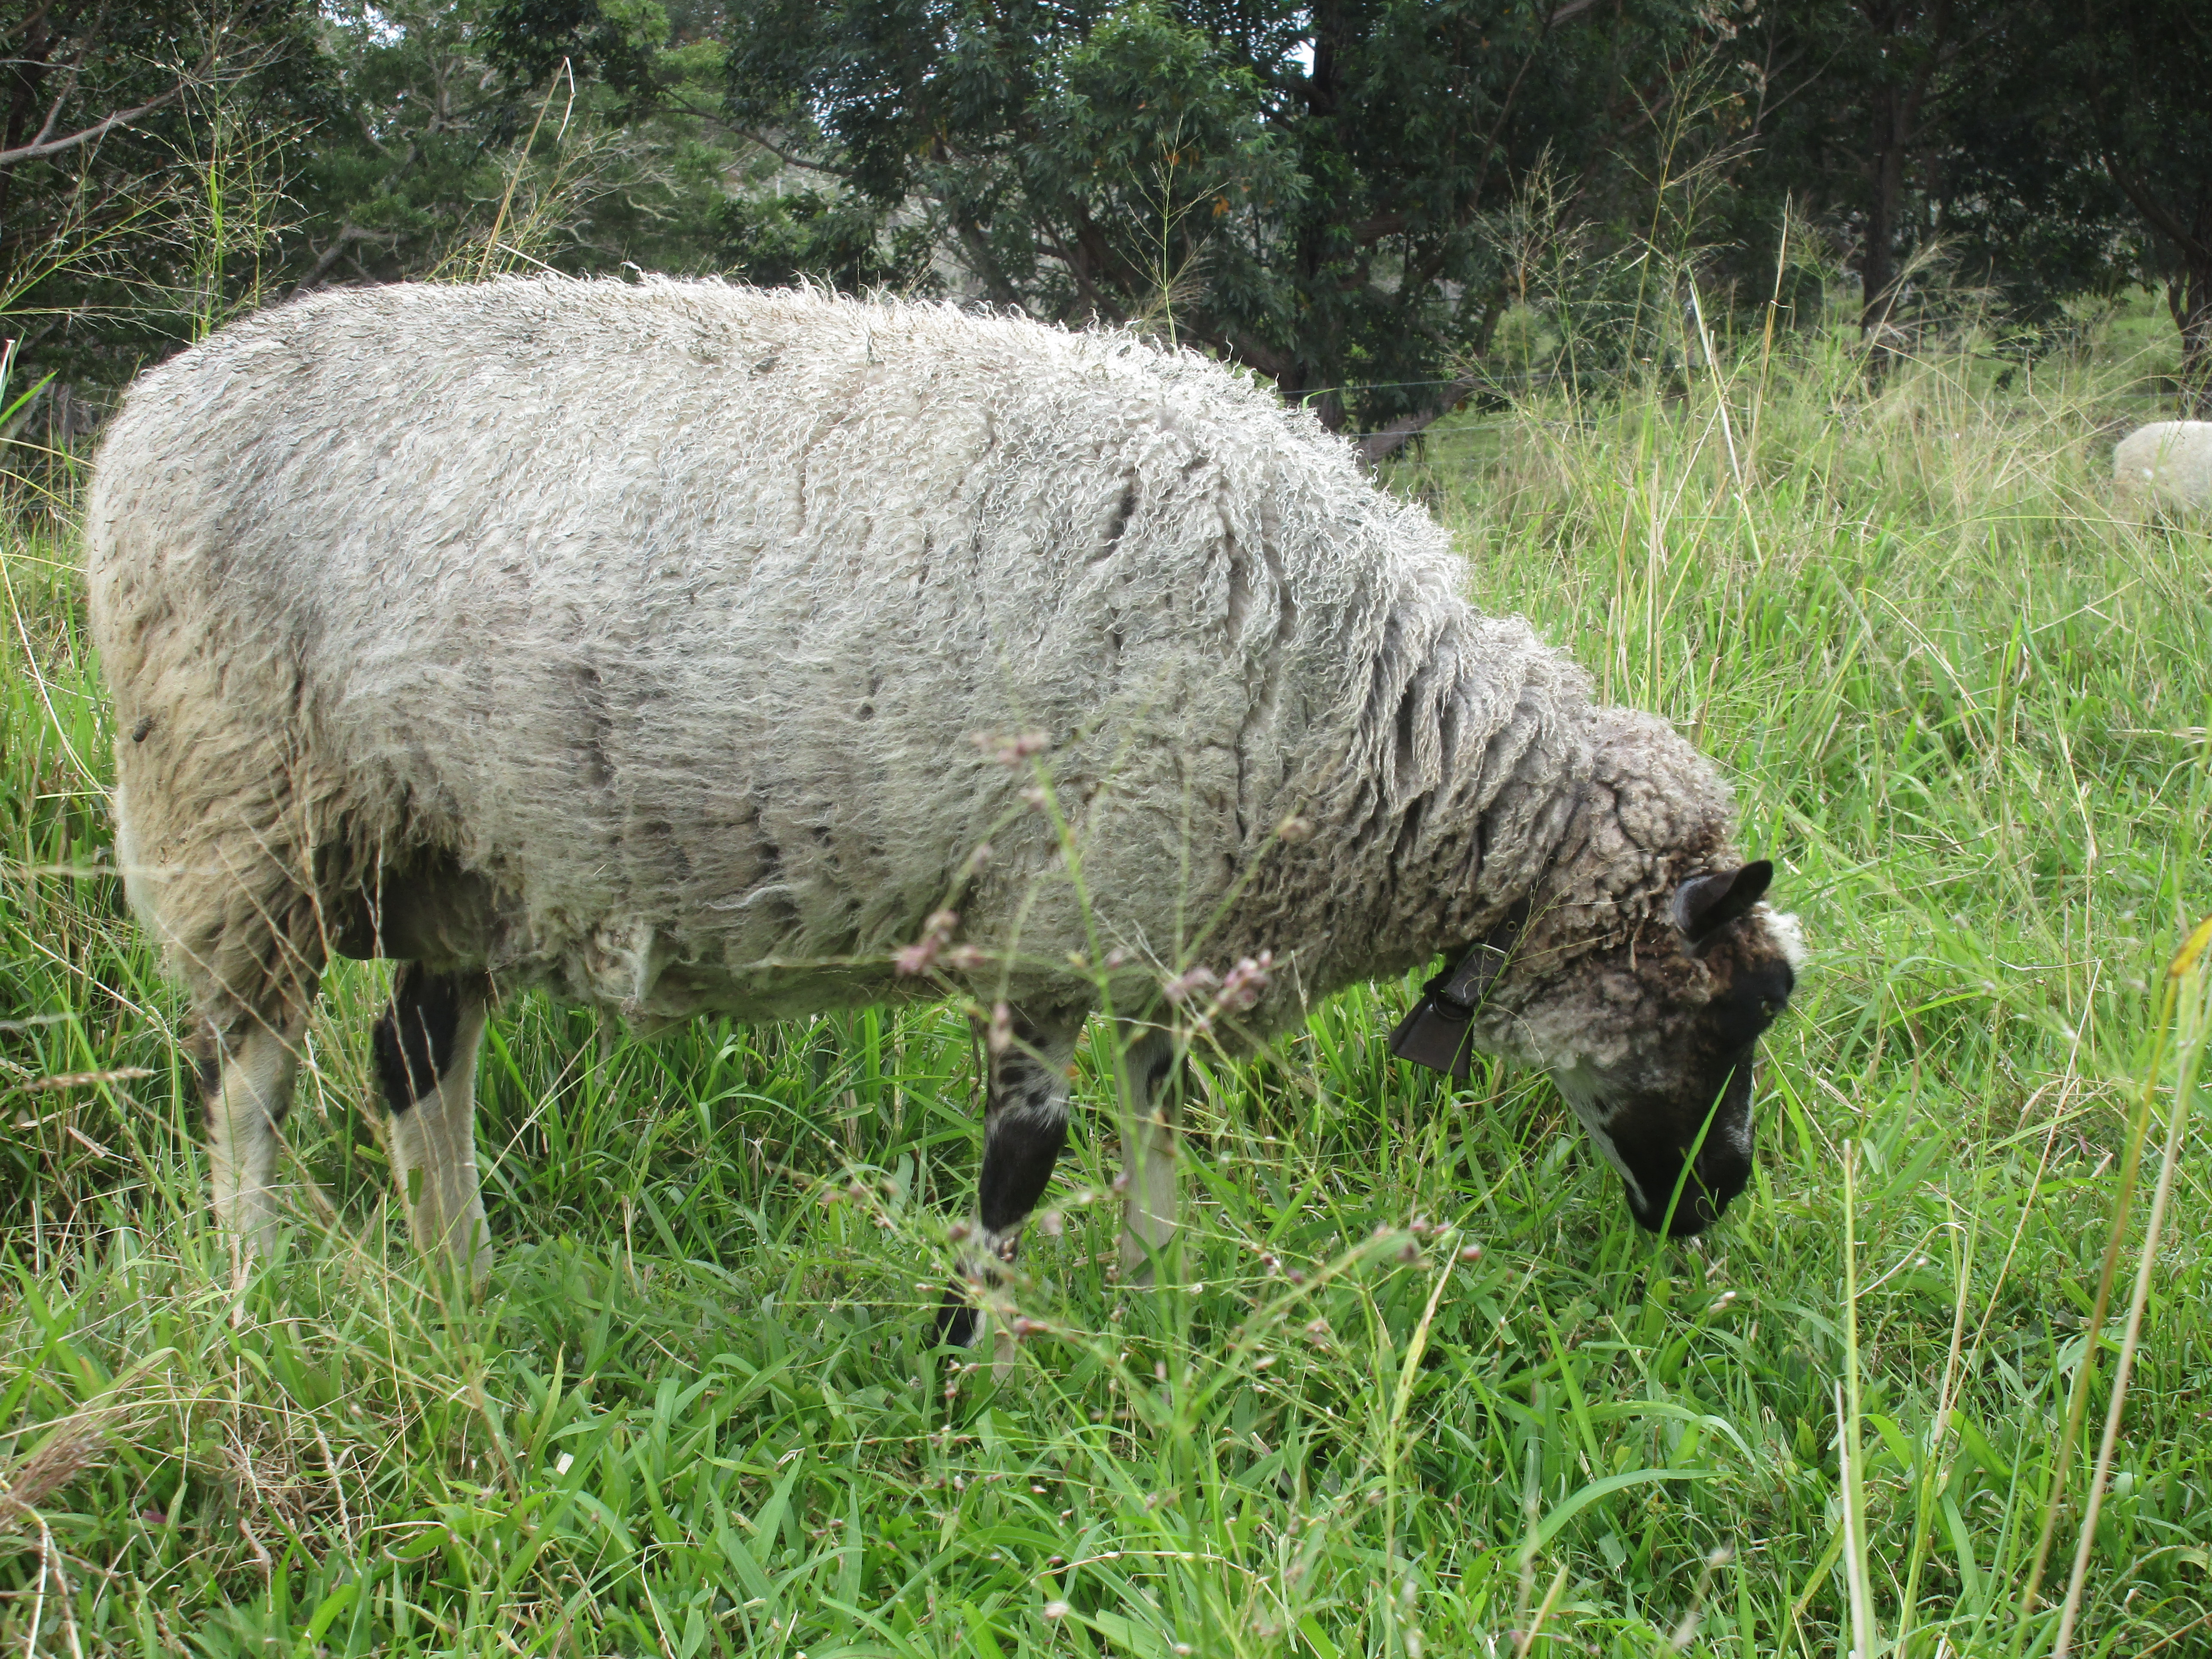 A photo of Fen's ewe from 2014